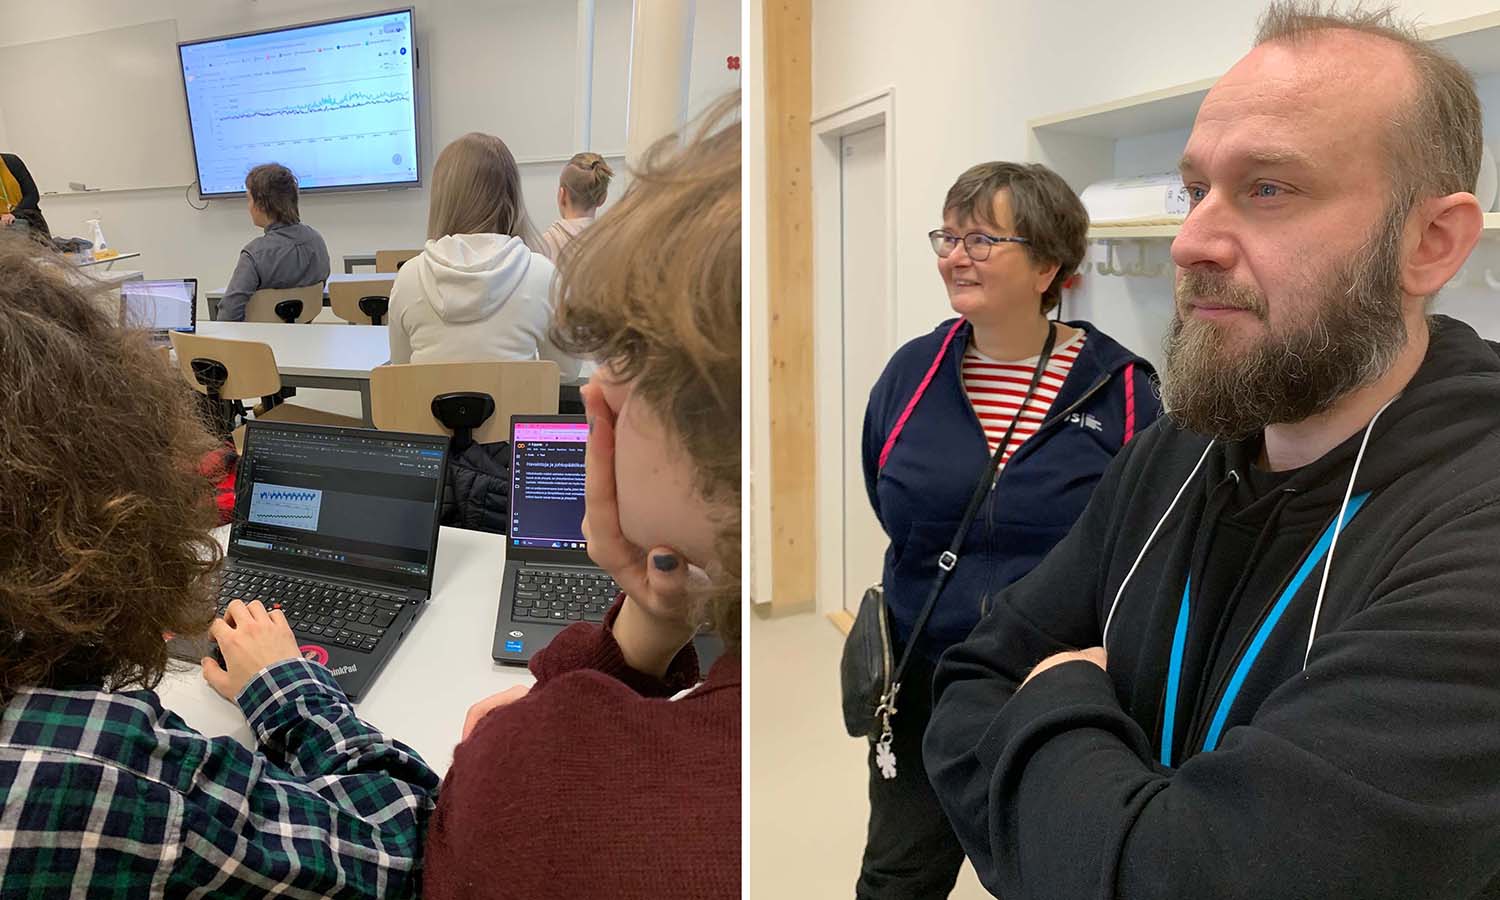 Elena Saltikoff and Ville Kasurinen from ICOS were happy to see the students engaging eagerly in the work using ICOS data.